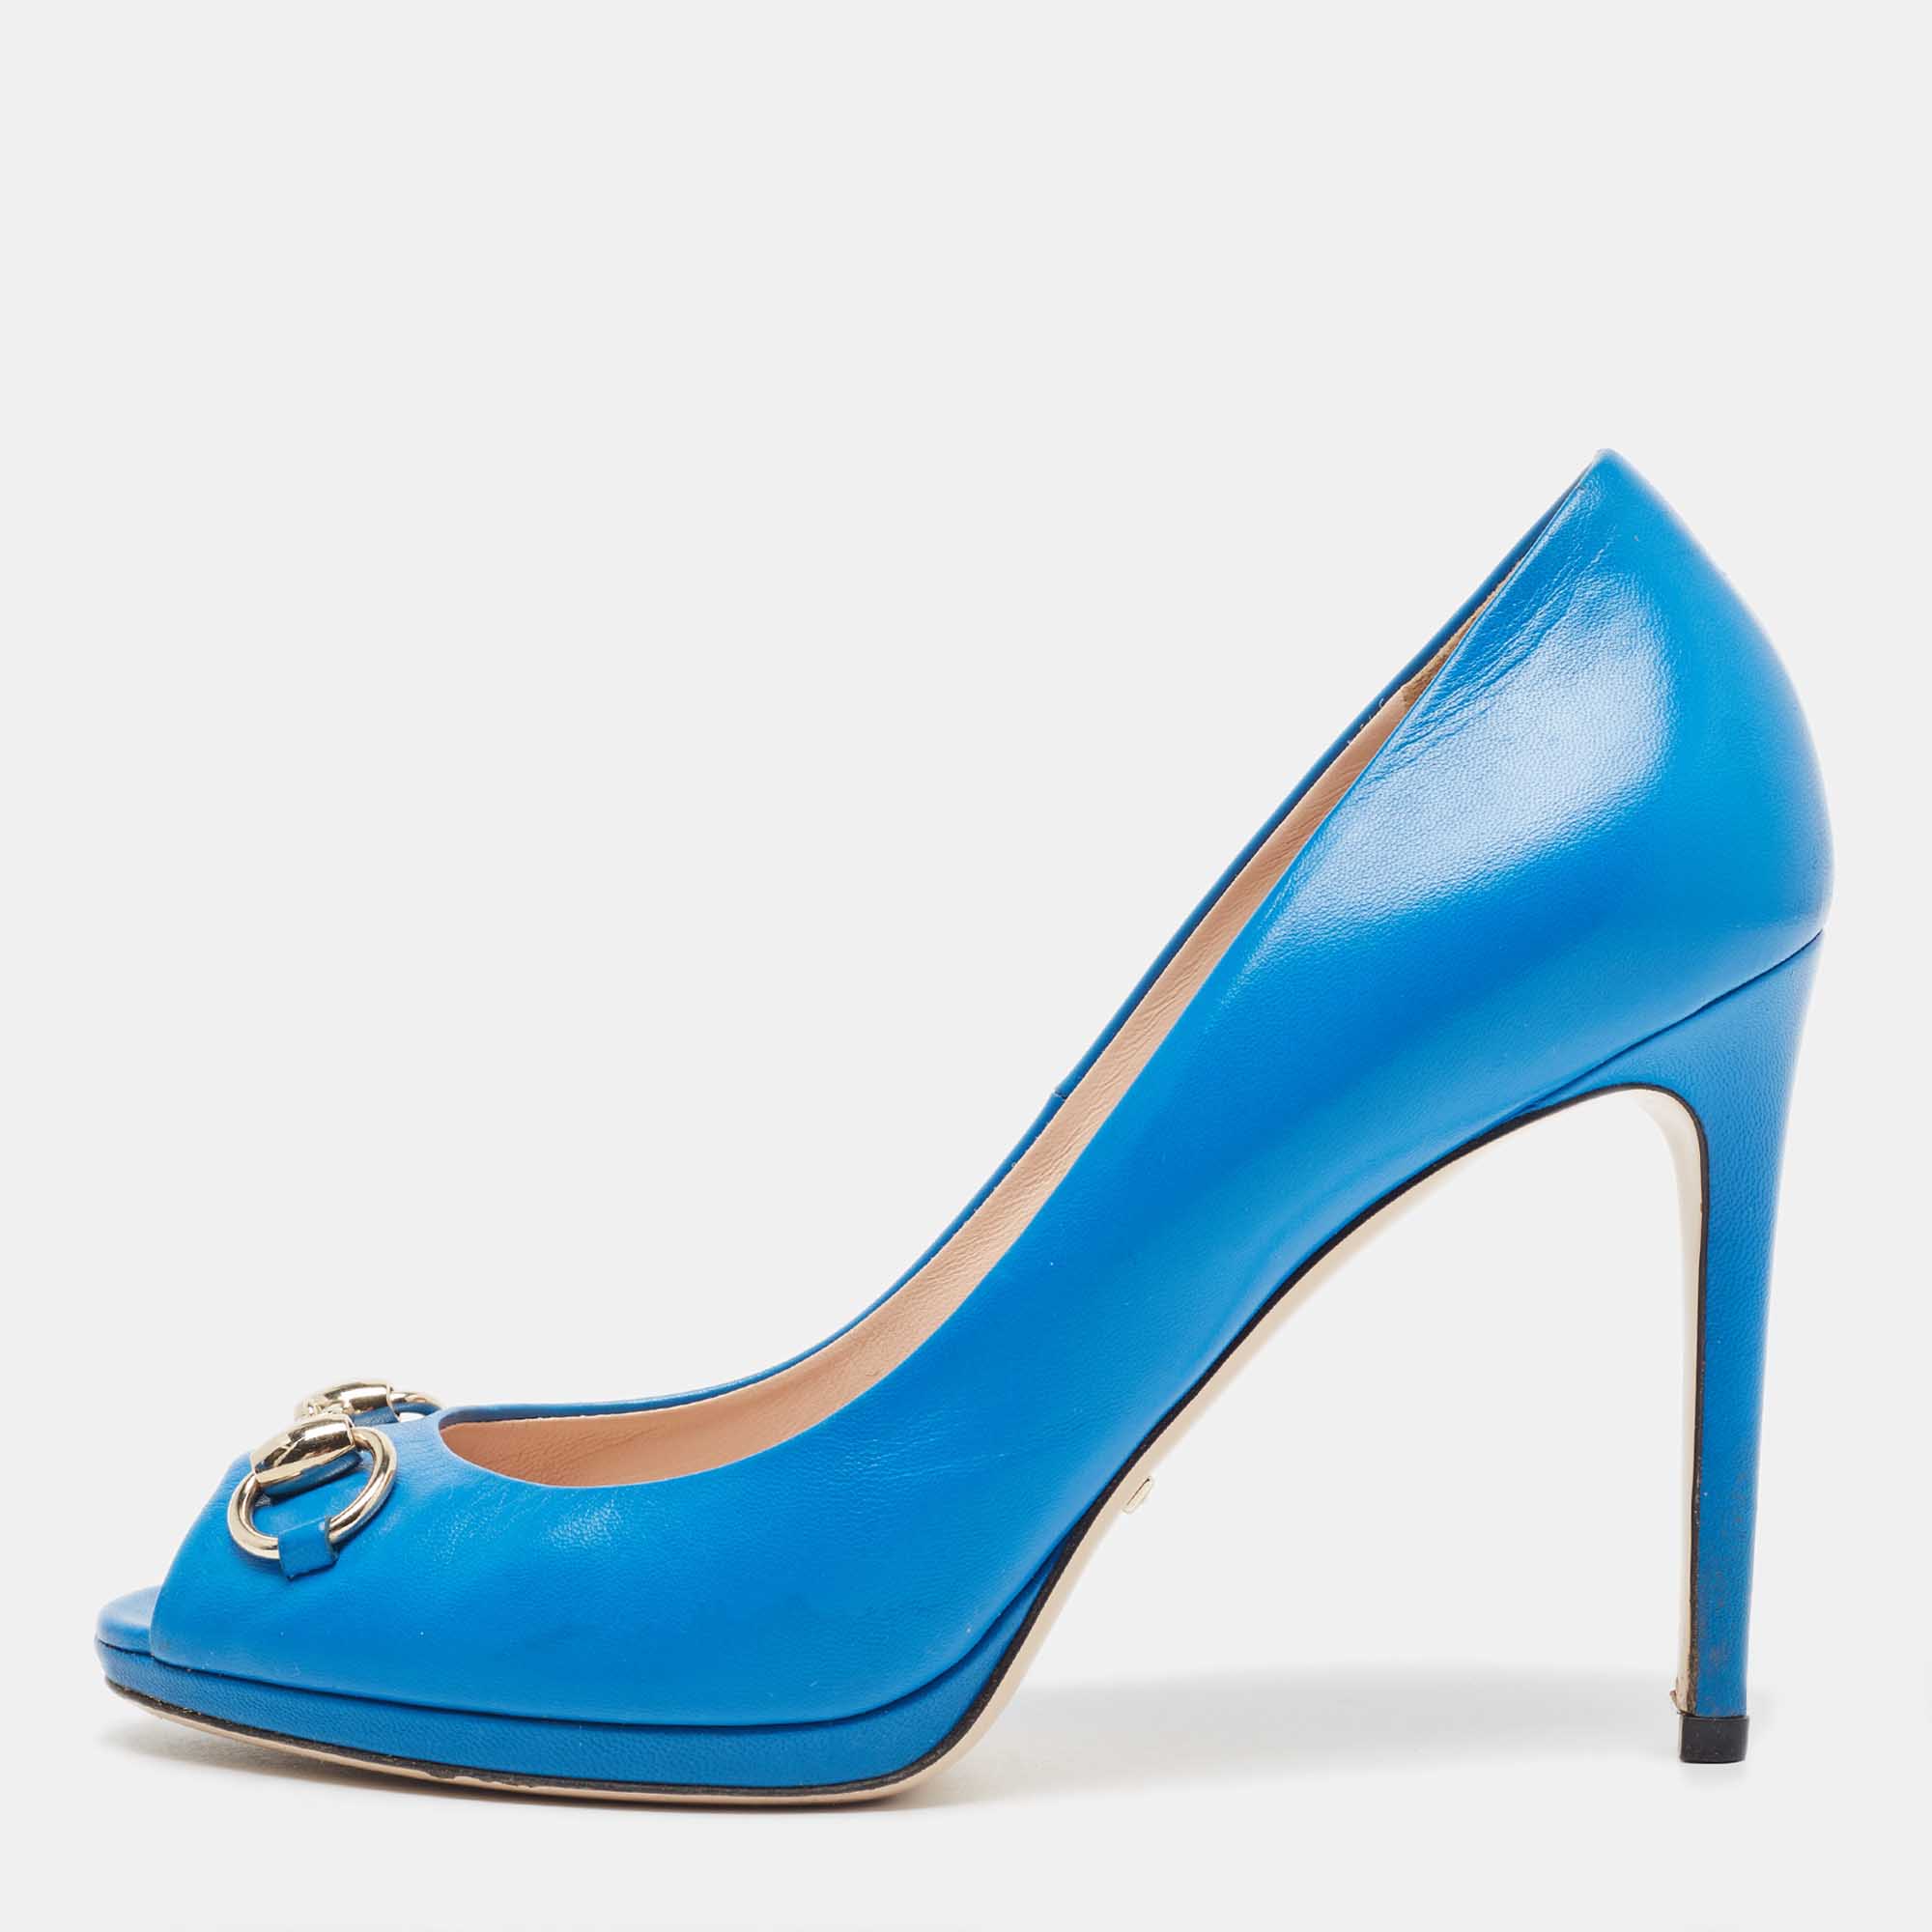 Gucci Blue Leather New Hollywood Platform Pumps Size 38.5